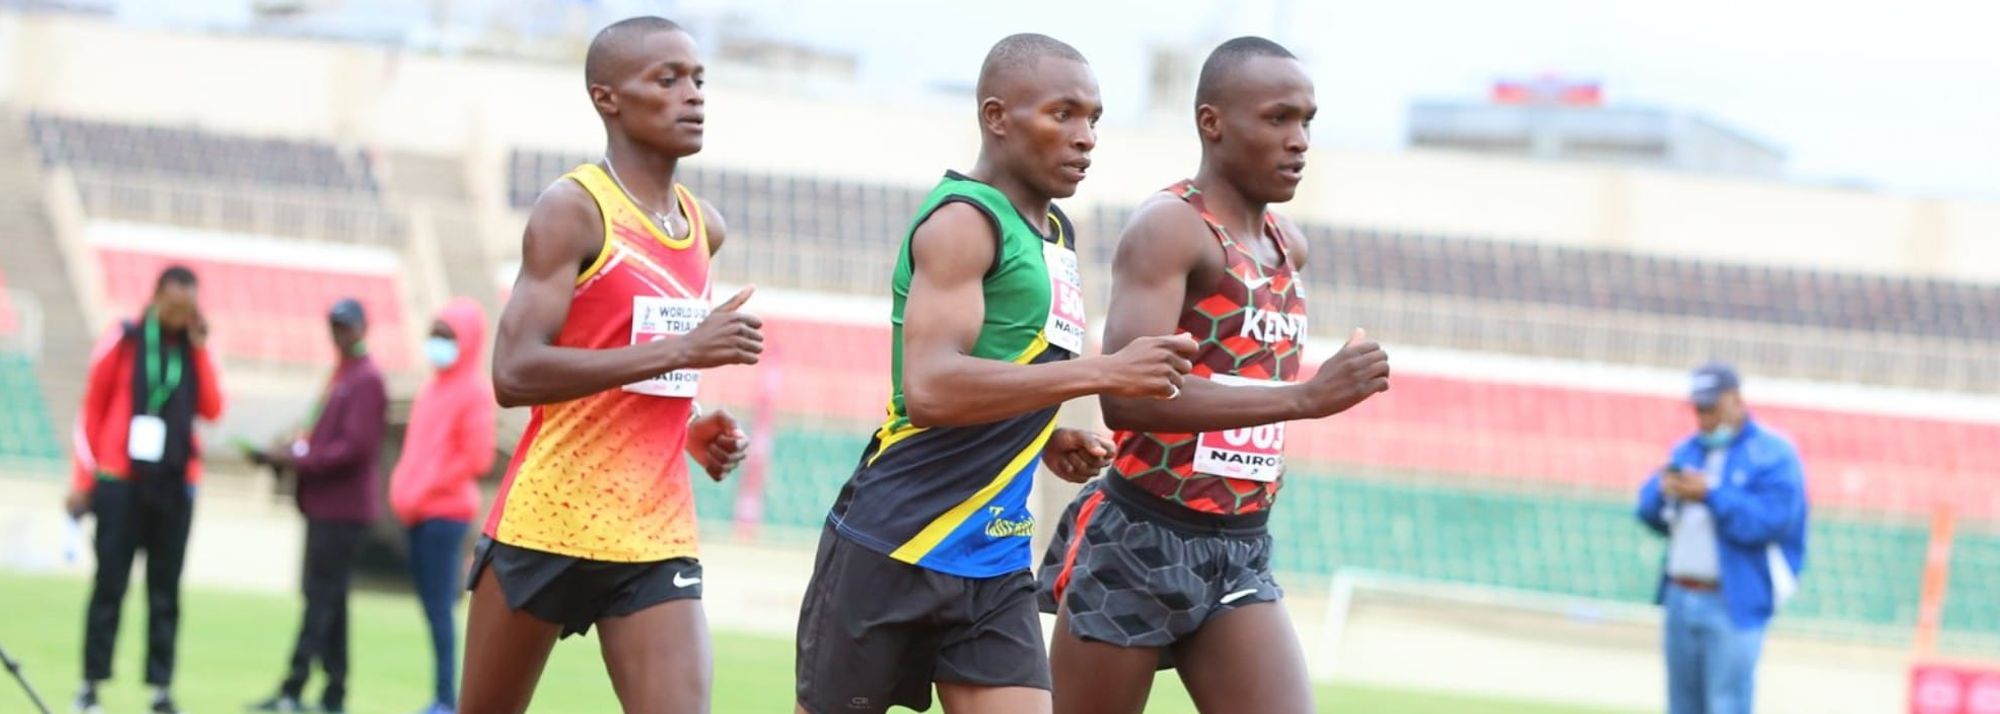 The Kenyan team for the World U20 Championships in Cali has been confirmed